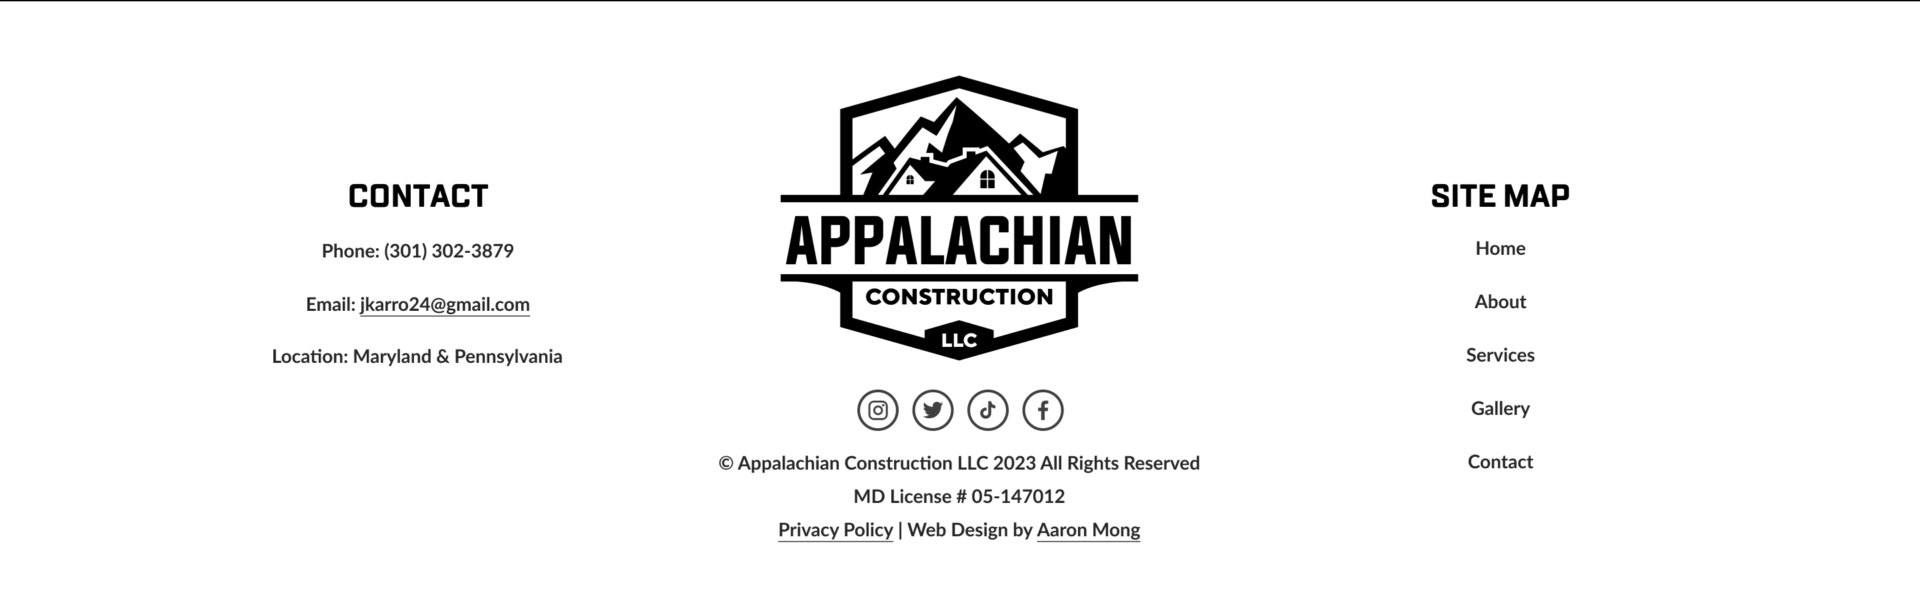 A black and white logo for the appalachian company.